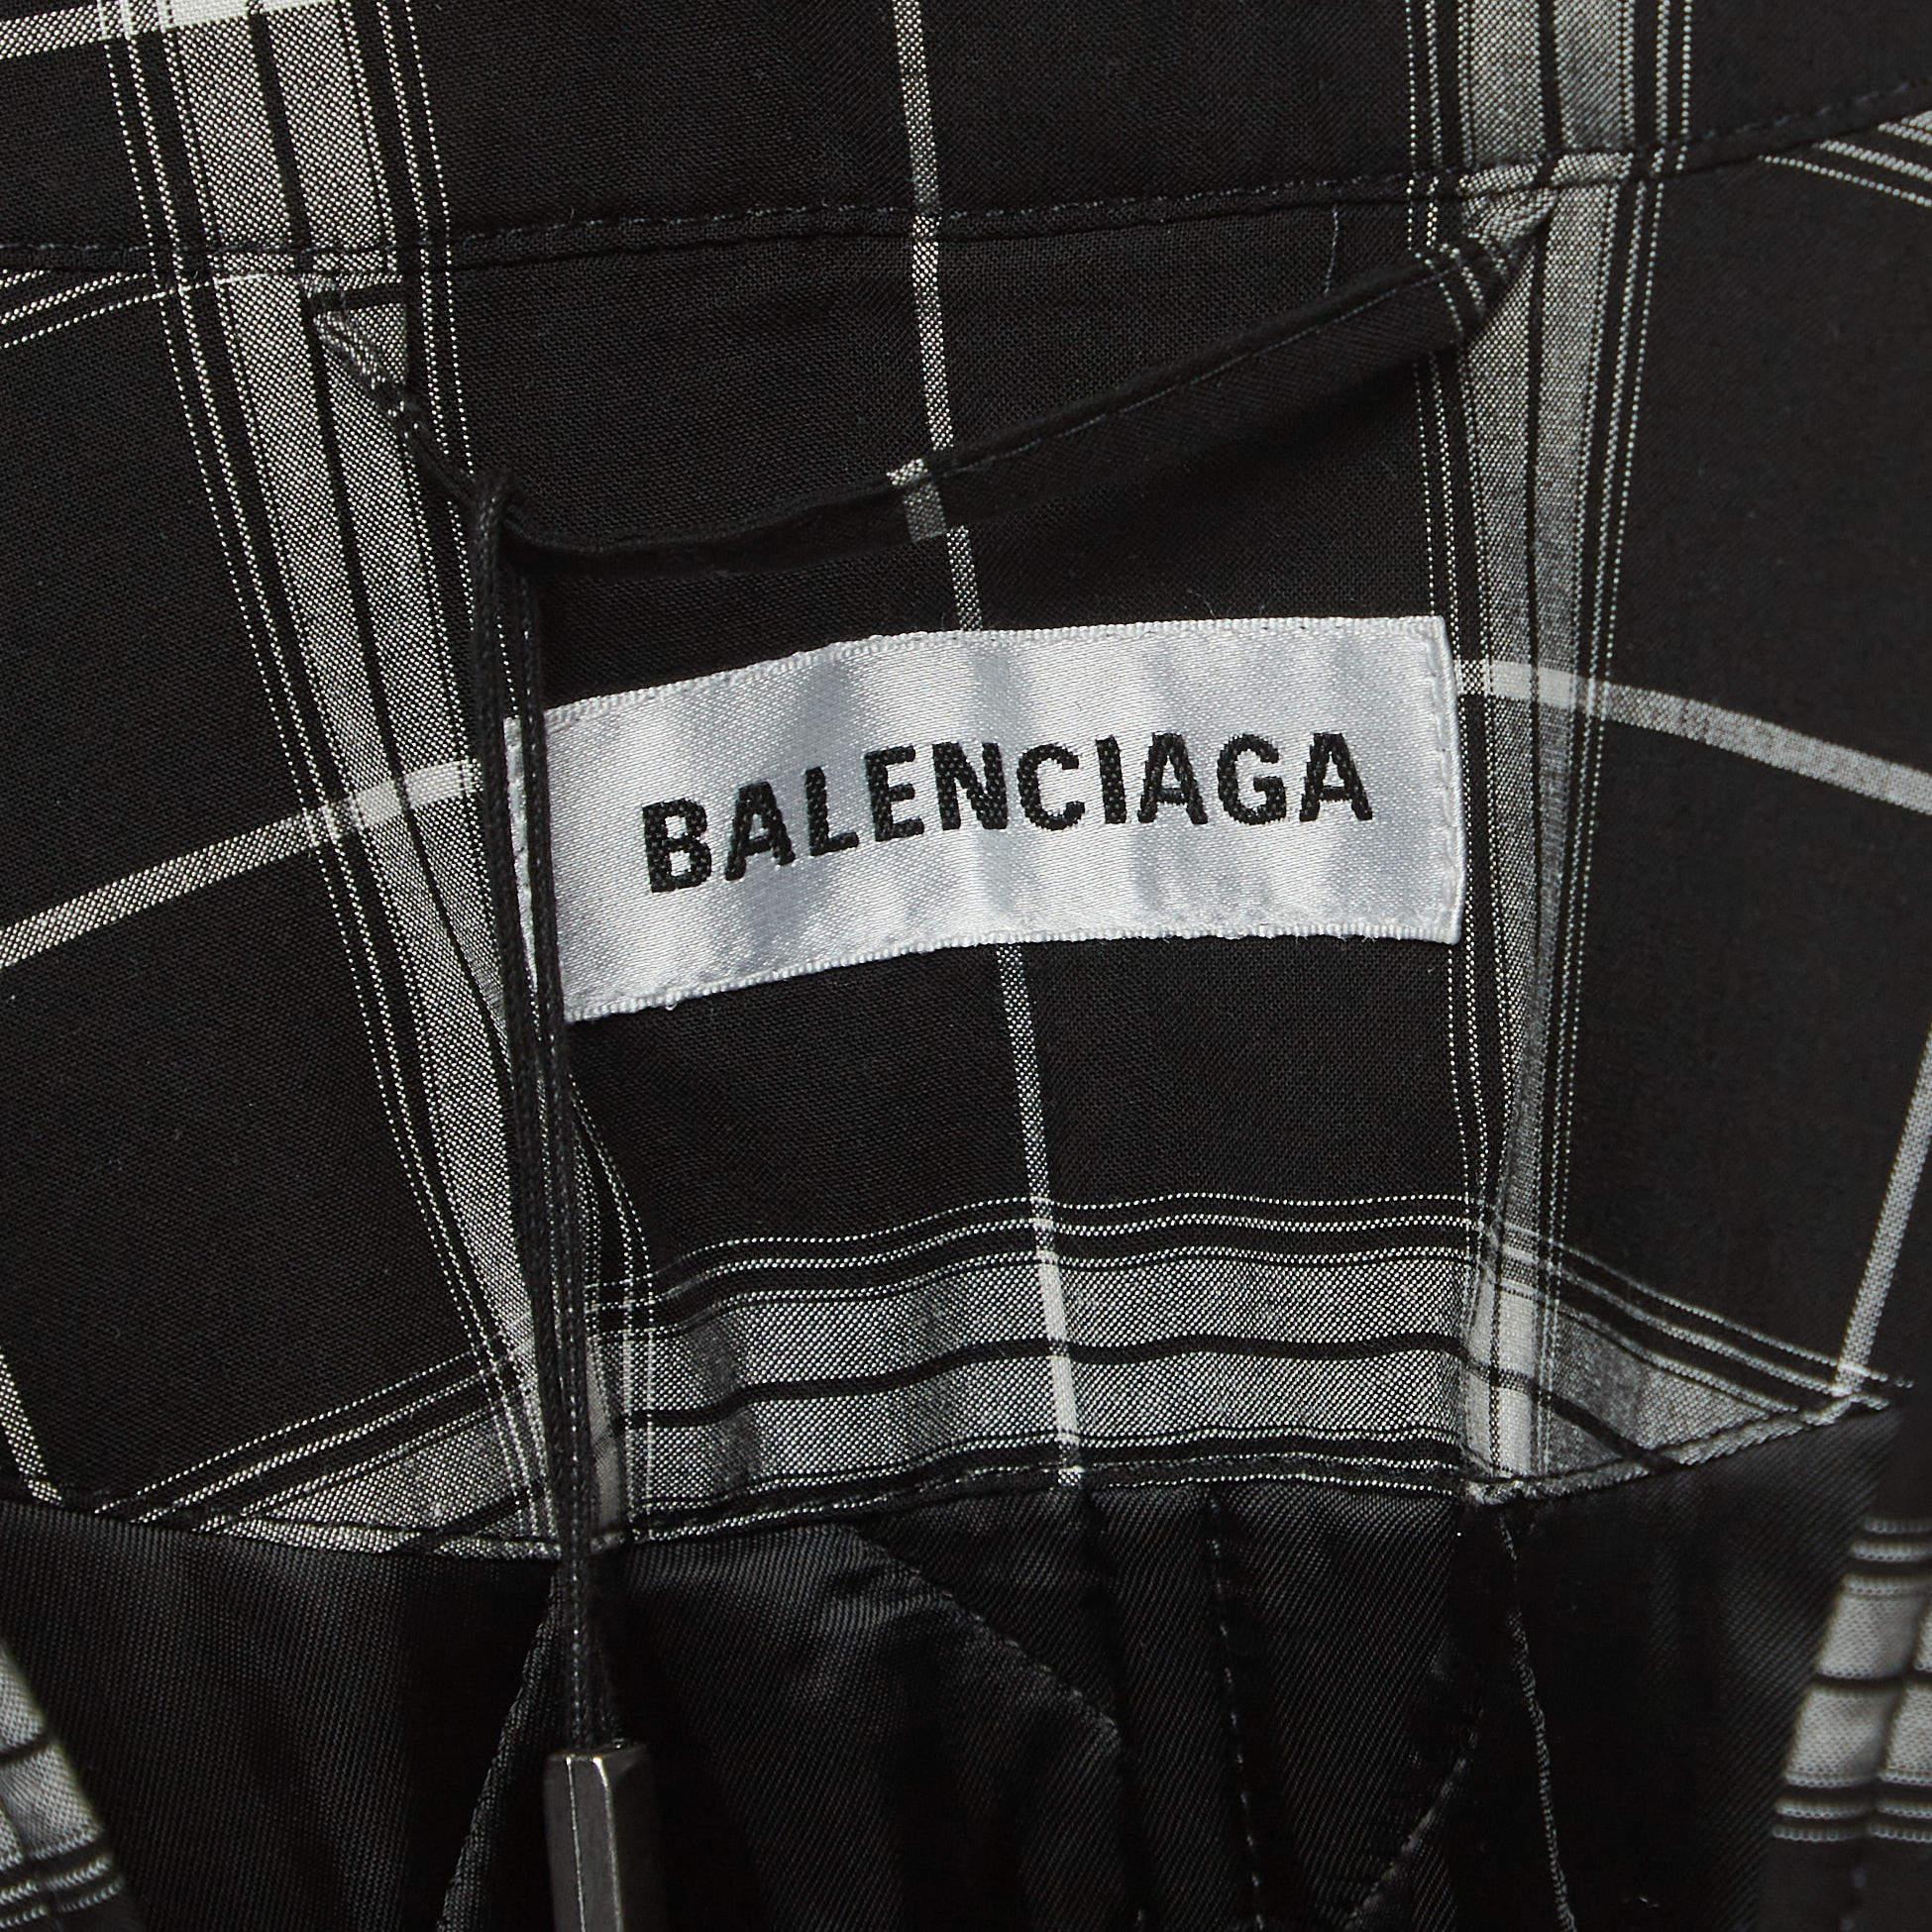 Balenciaga Black/White Checked Lyocell Blend Padded Shirt S In Excellent Condition For Sale In Dubai, Al Qouz 2